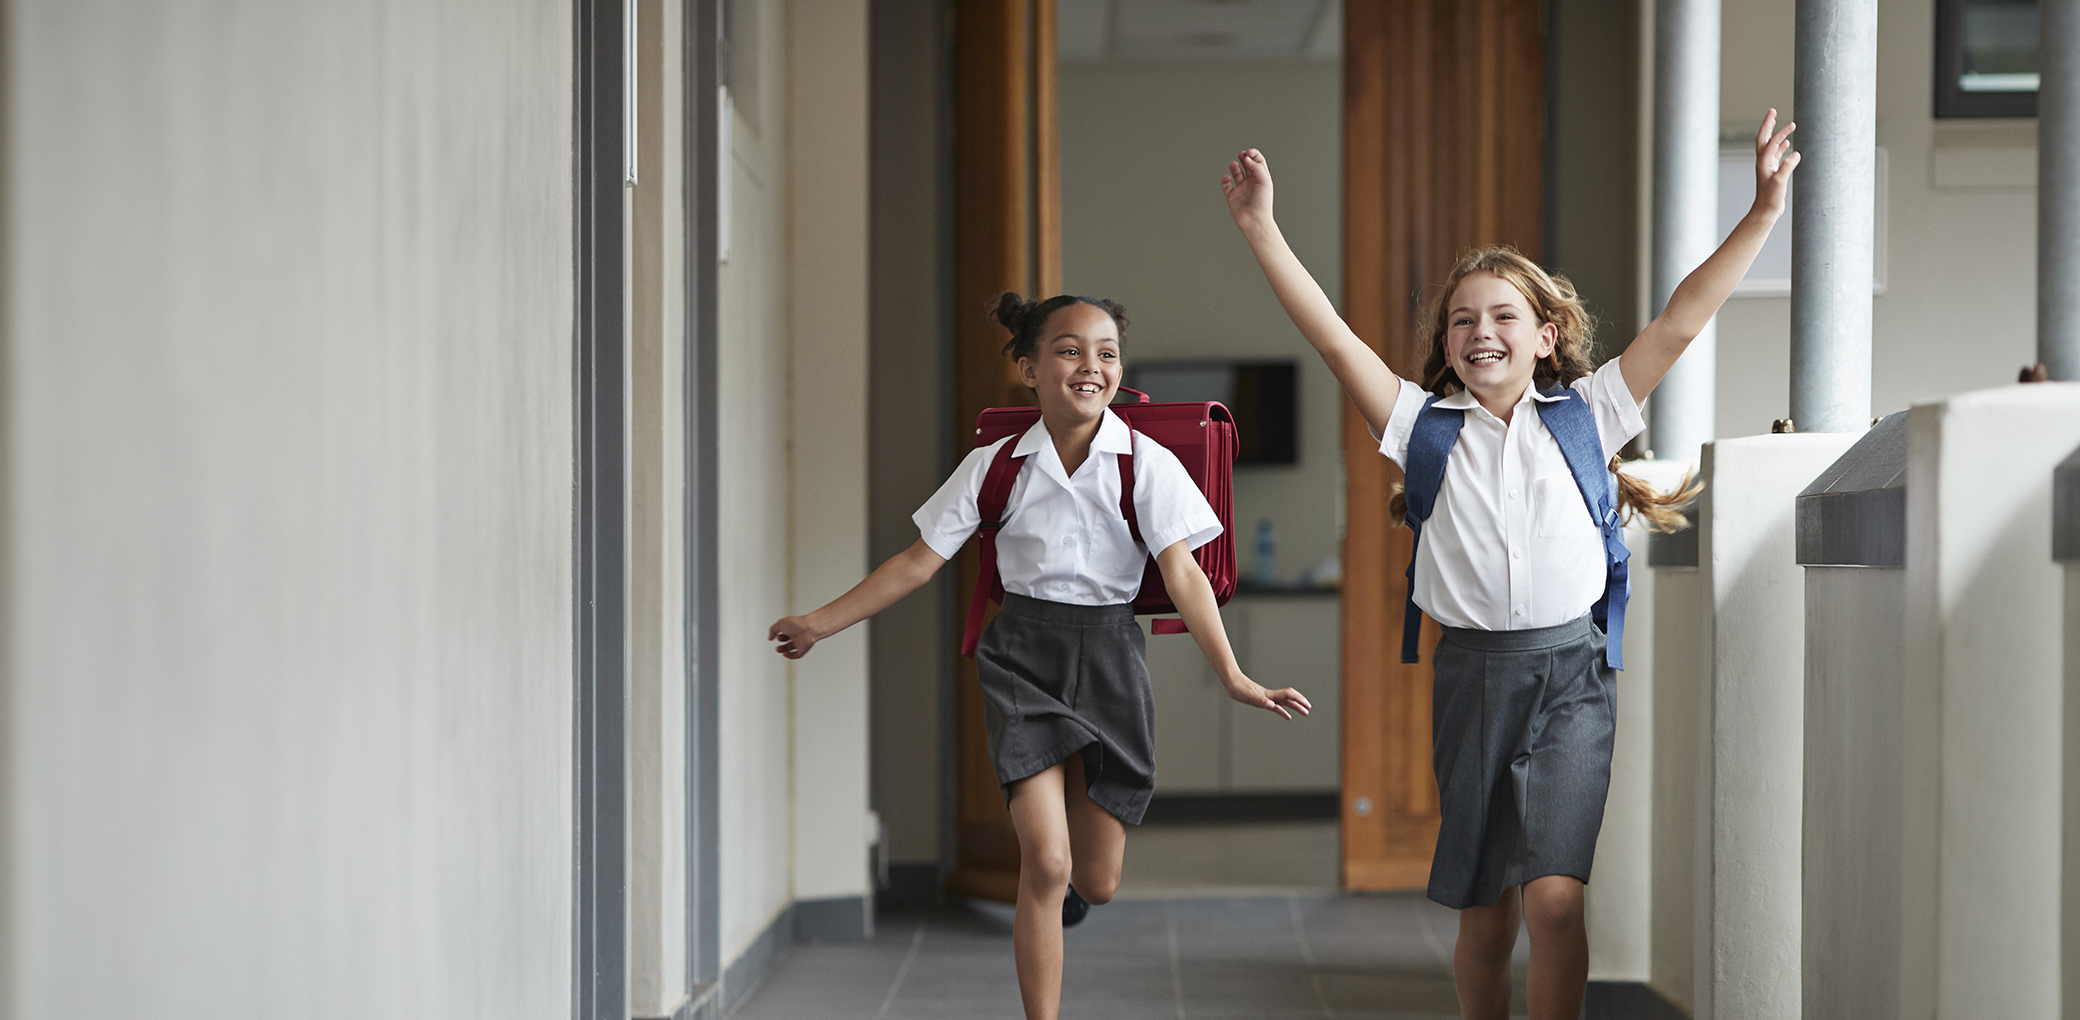 Two primary school girls skip together in a hallway.